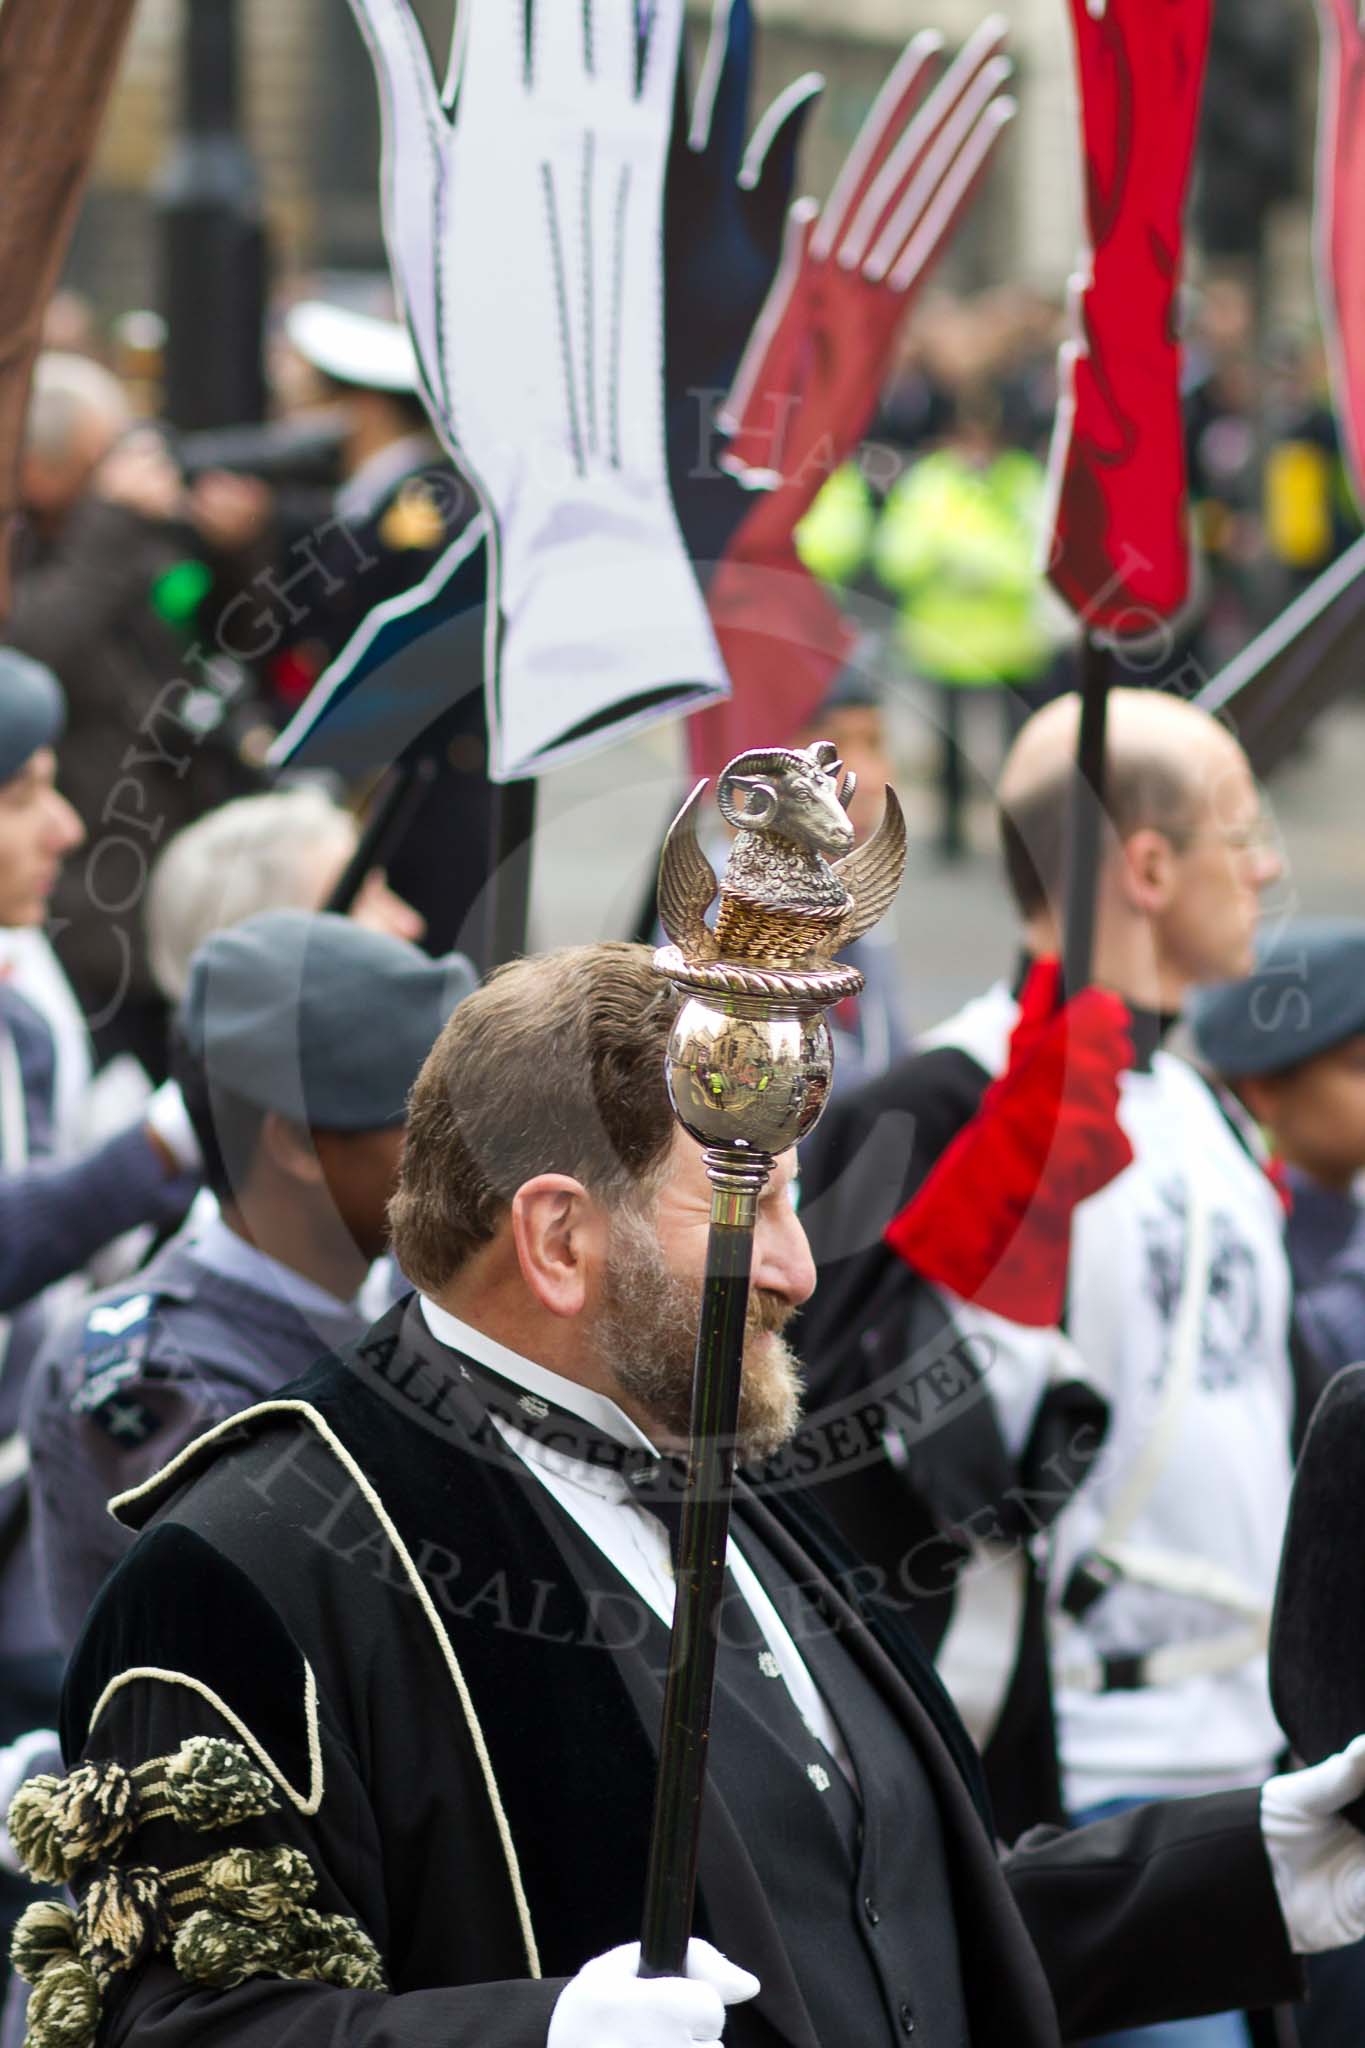 The Lord Mayor's Show 2011: Beadle, Paul Tredgett, Worshipful Company of Glovers (http://www.thegloverscompany.org/)..
Opposite Mansion House, City of London,
London,
-,
United Kingdom,
on 12 November 2011 at 11:12, image #161